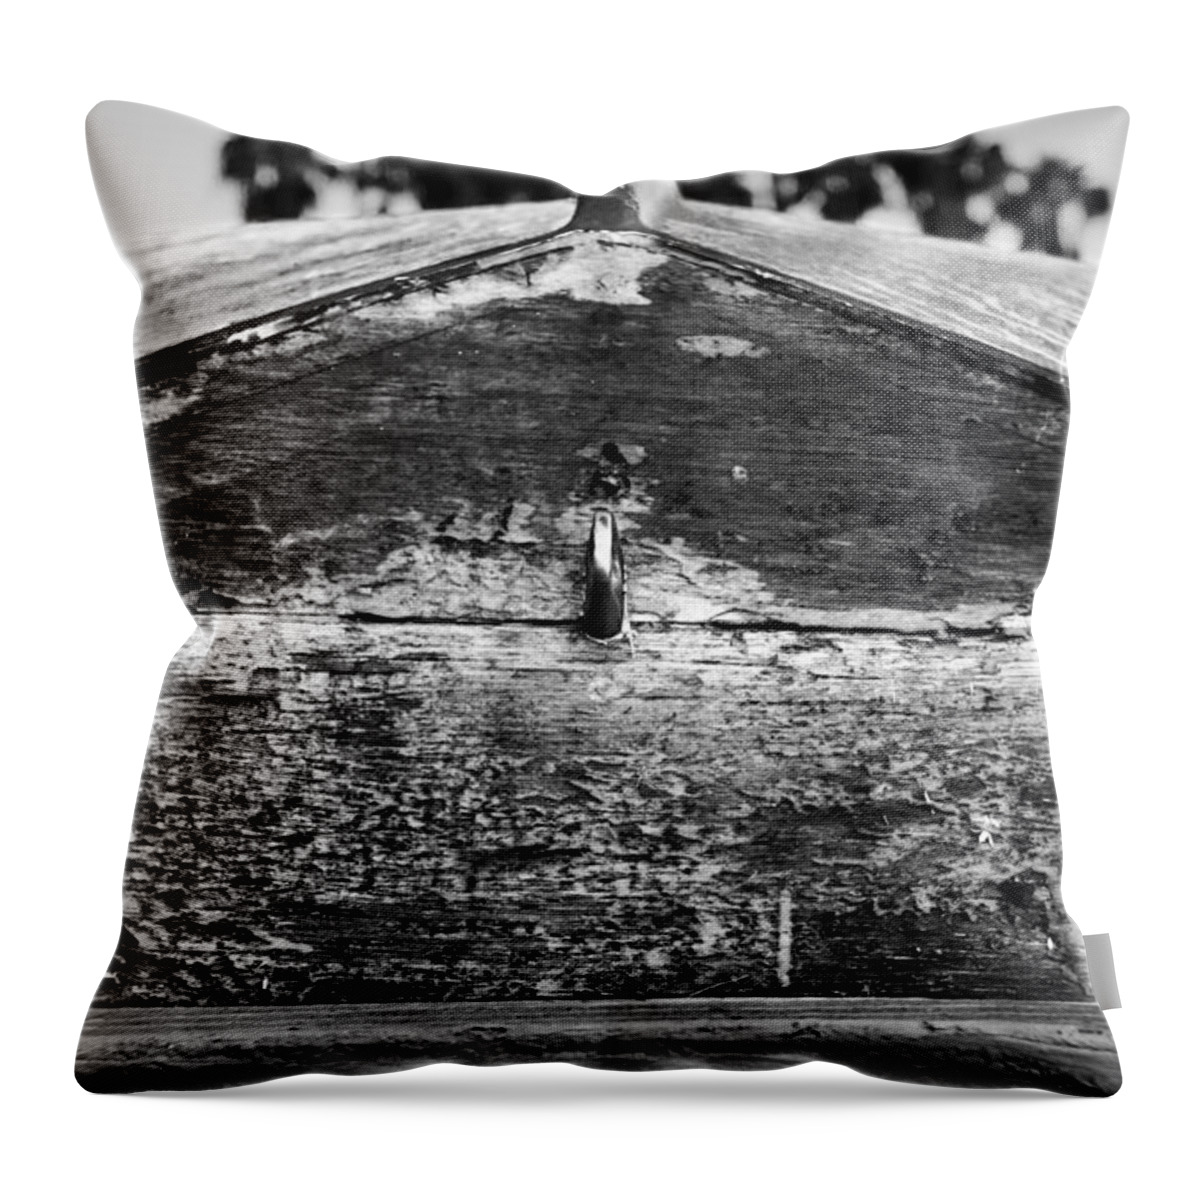 Abandond Throw Pillow featuring the photograph Better Days by Denise Dube